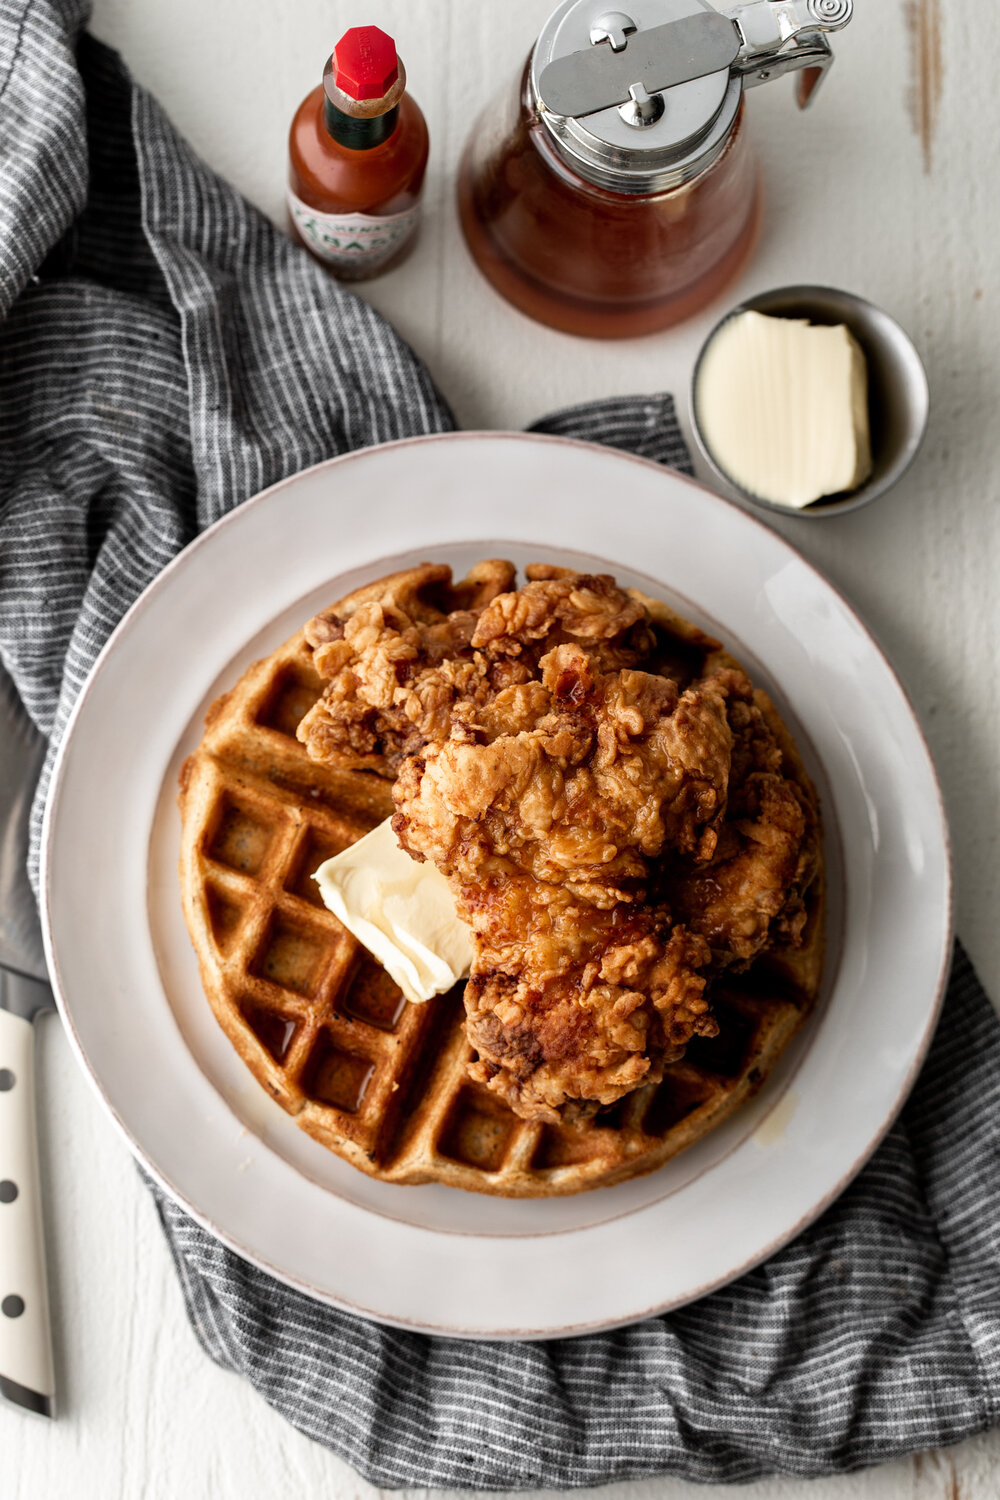 Fried chicken and waffles sweetened with a hint of cinnamon served with hot sauce maple syrup